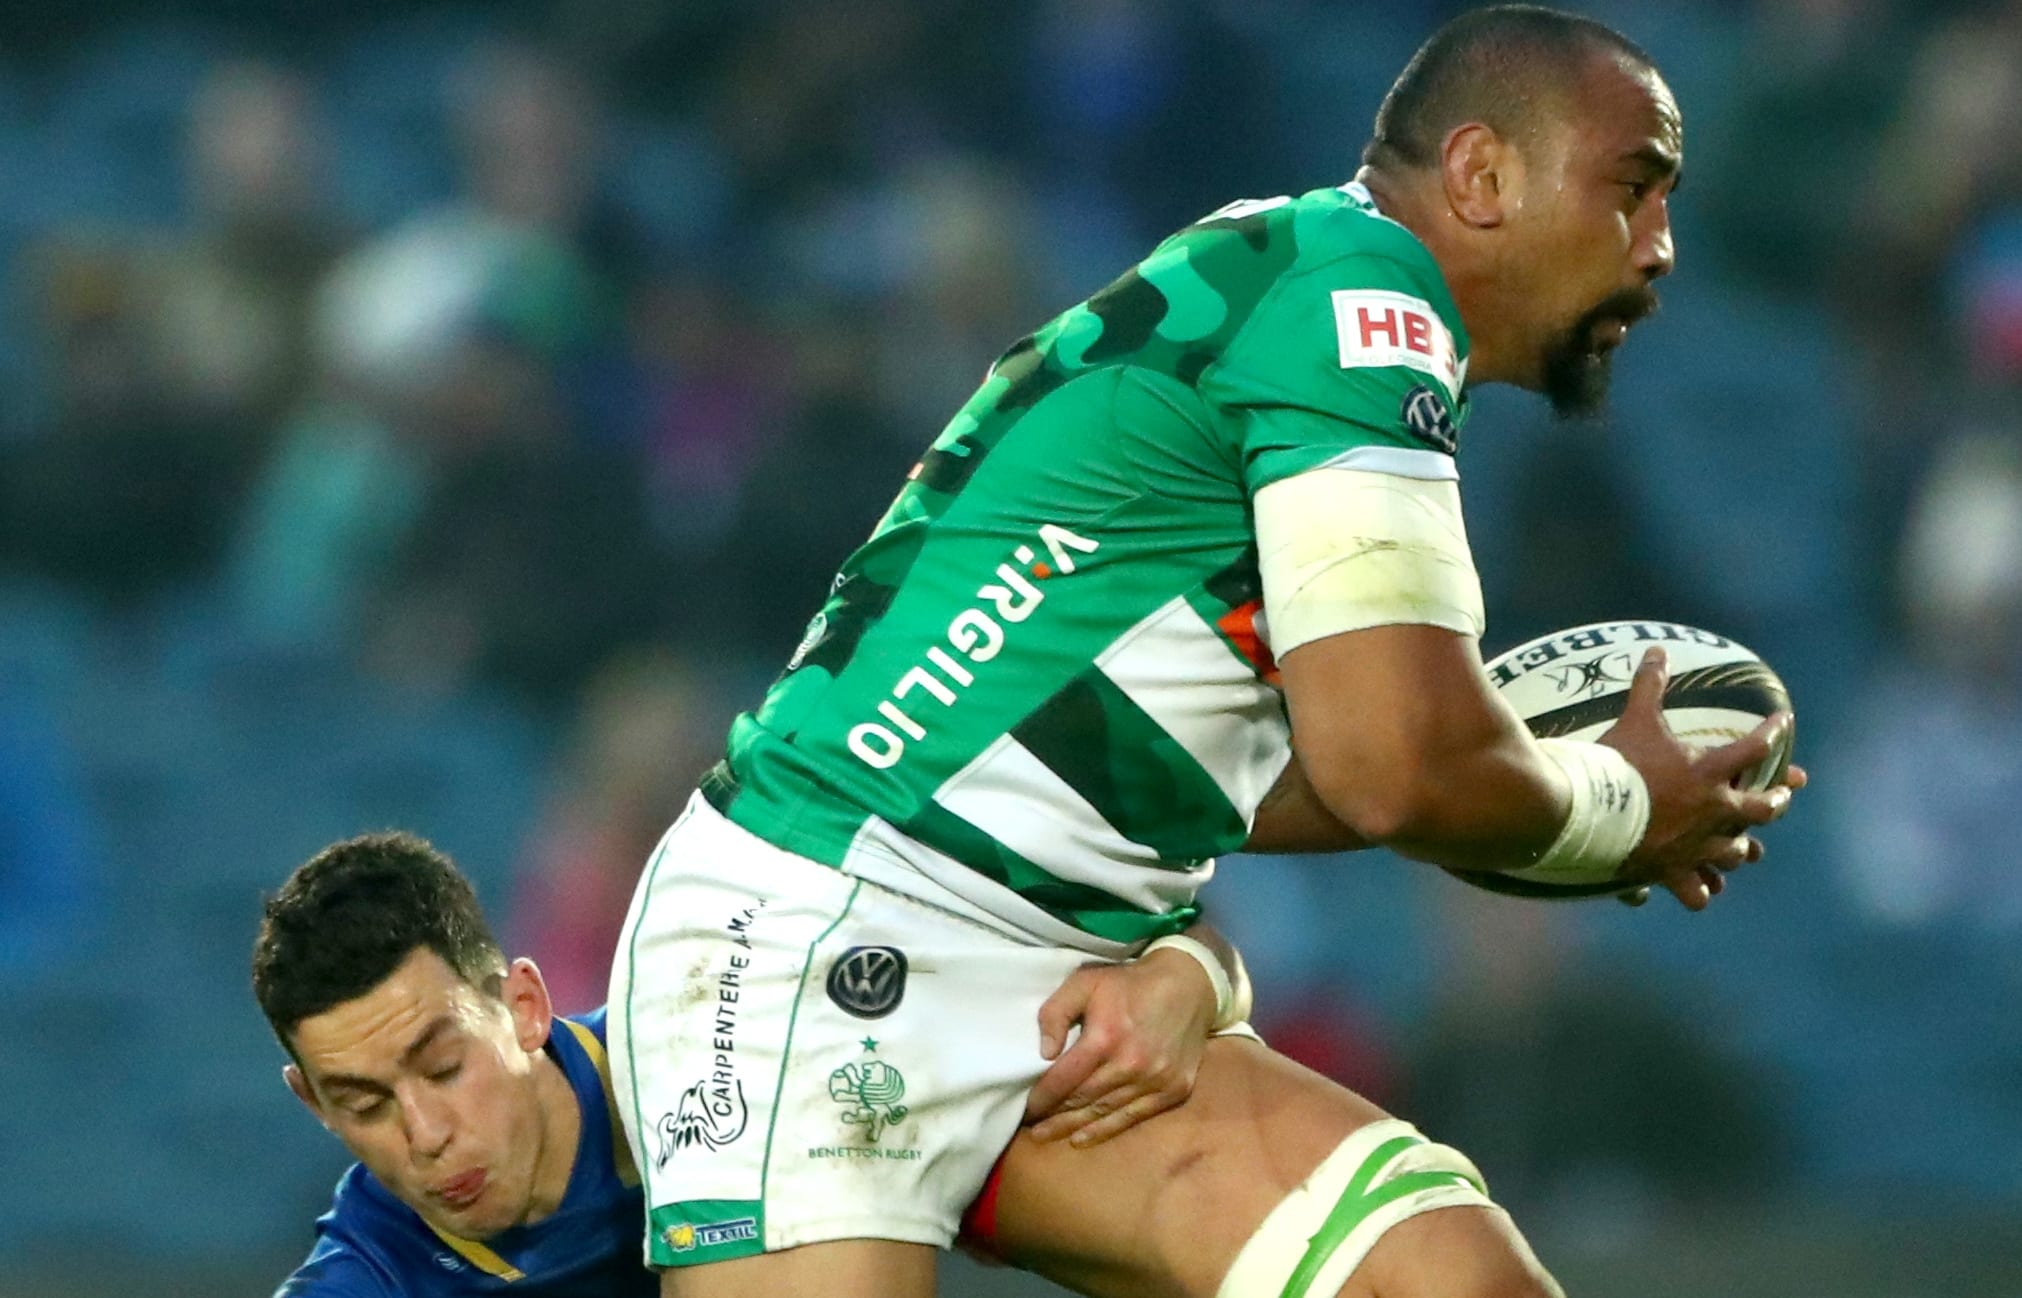 Benetton Treviso's Nasi Manu attempts to evade the tackle of Leinster's Noel Reid.